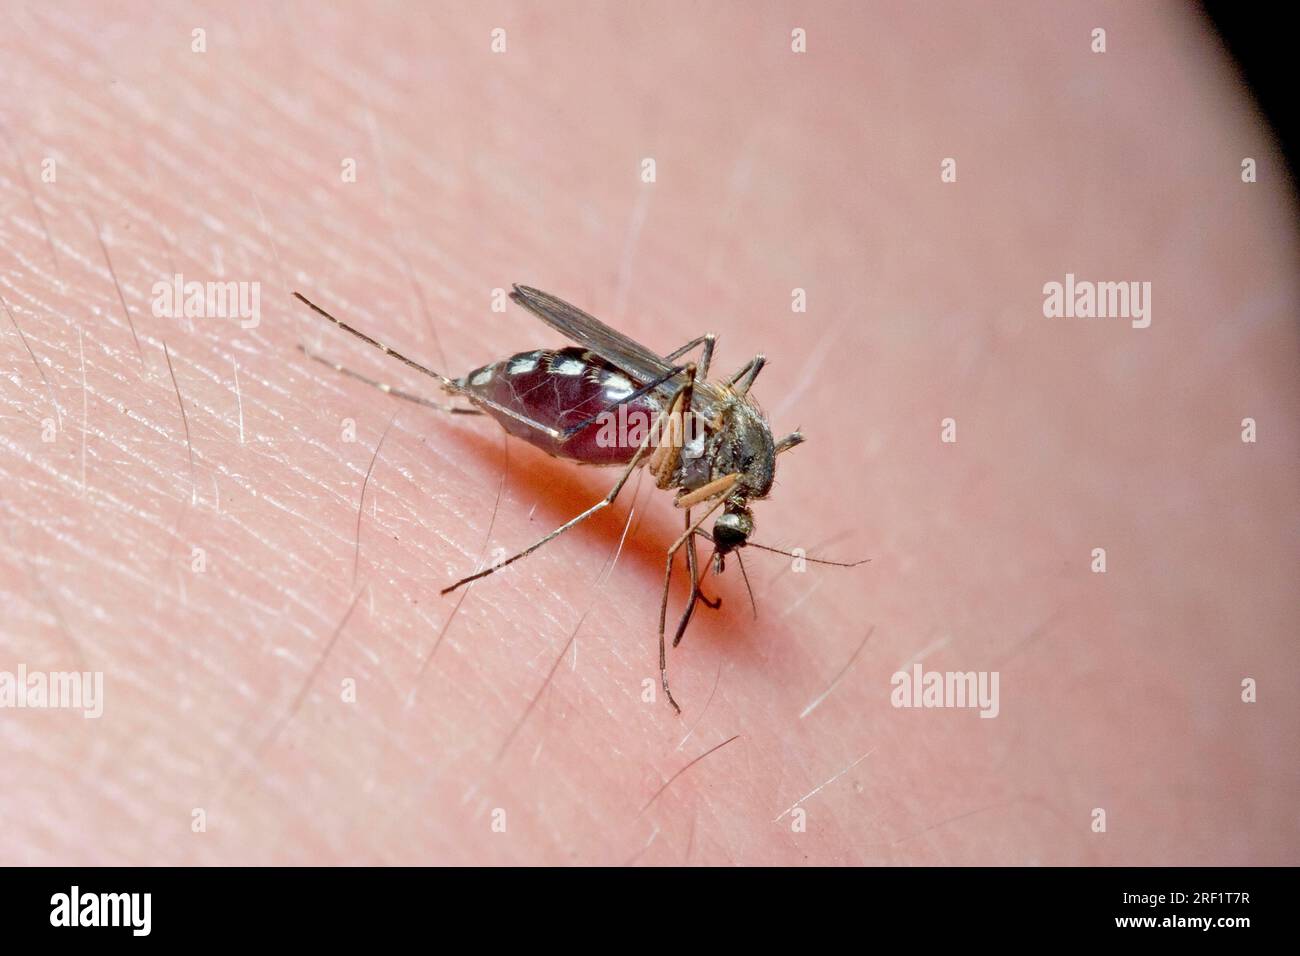 House mosquito on human skin (Culex pipiens), Germany Stock Photo